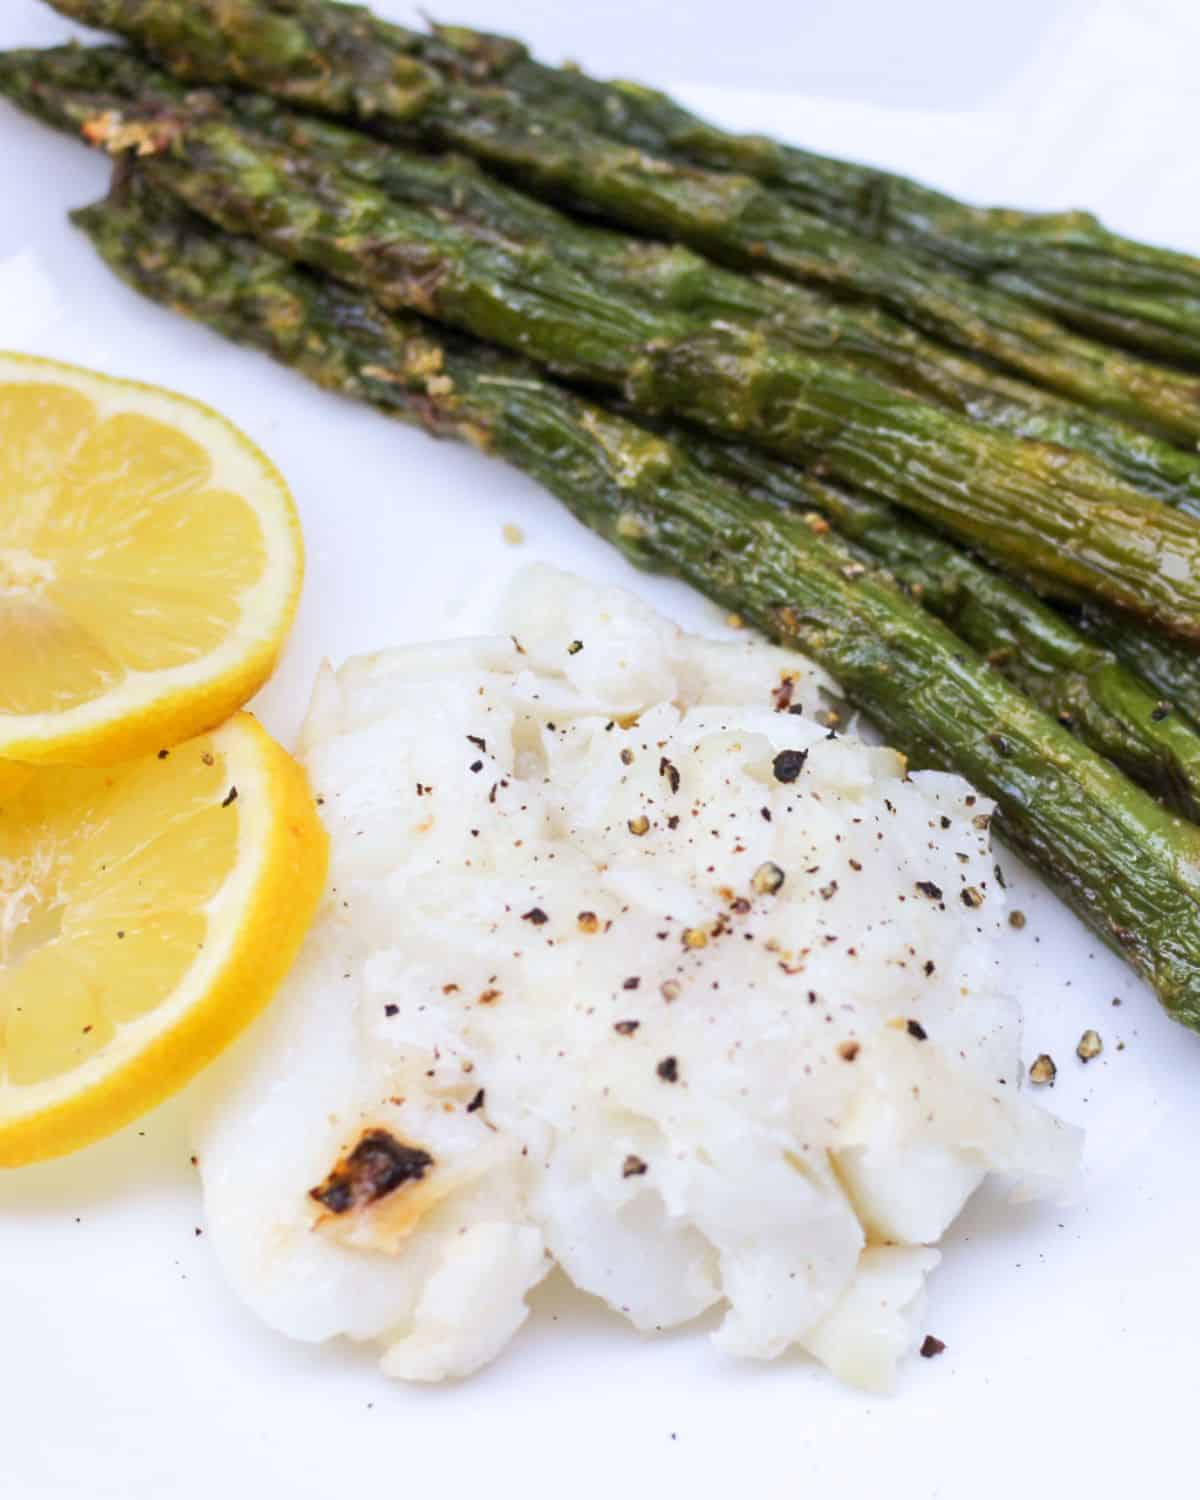 A plate with white fish meat, roasted asparagus and fresh sliced lemon slices on a side.